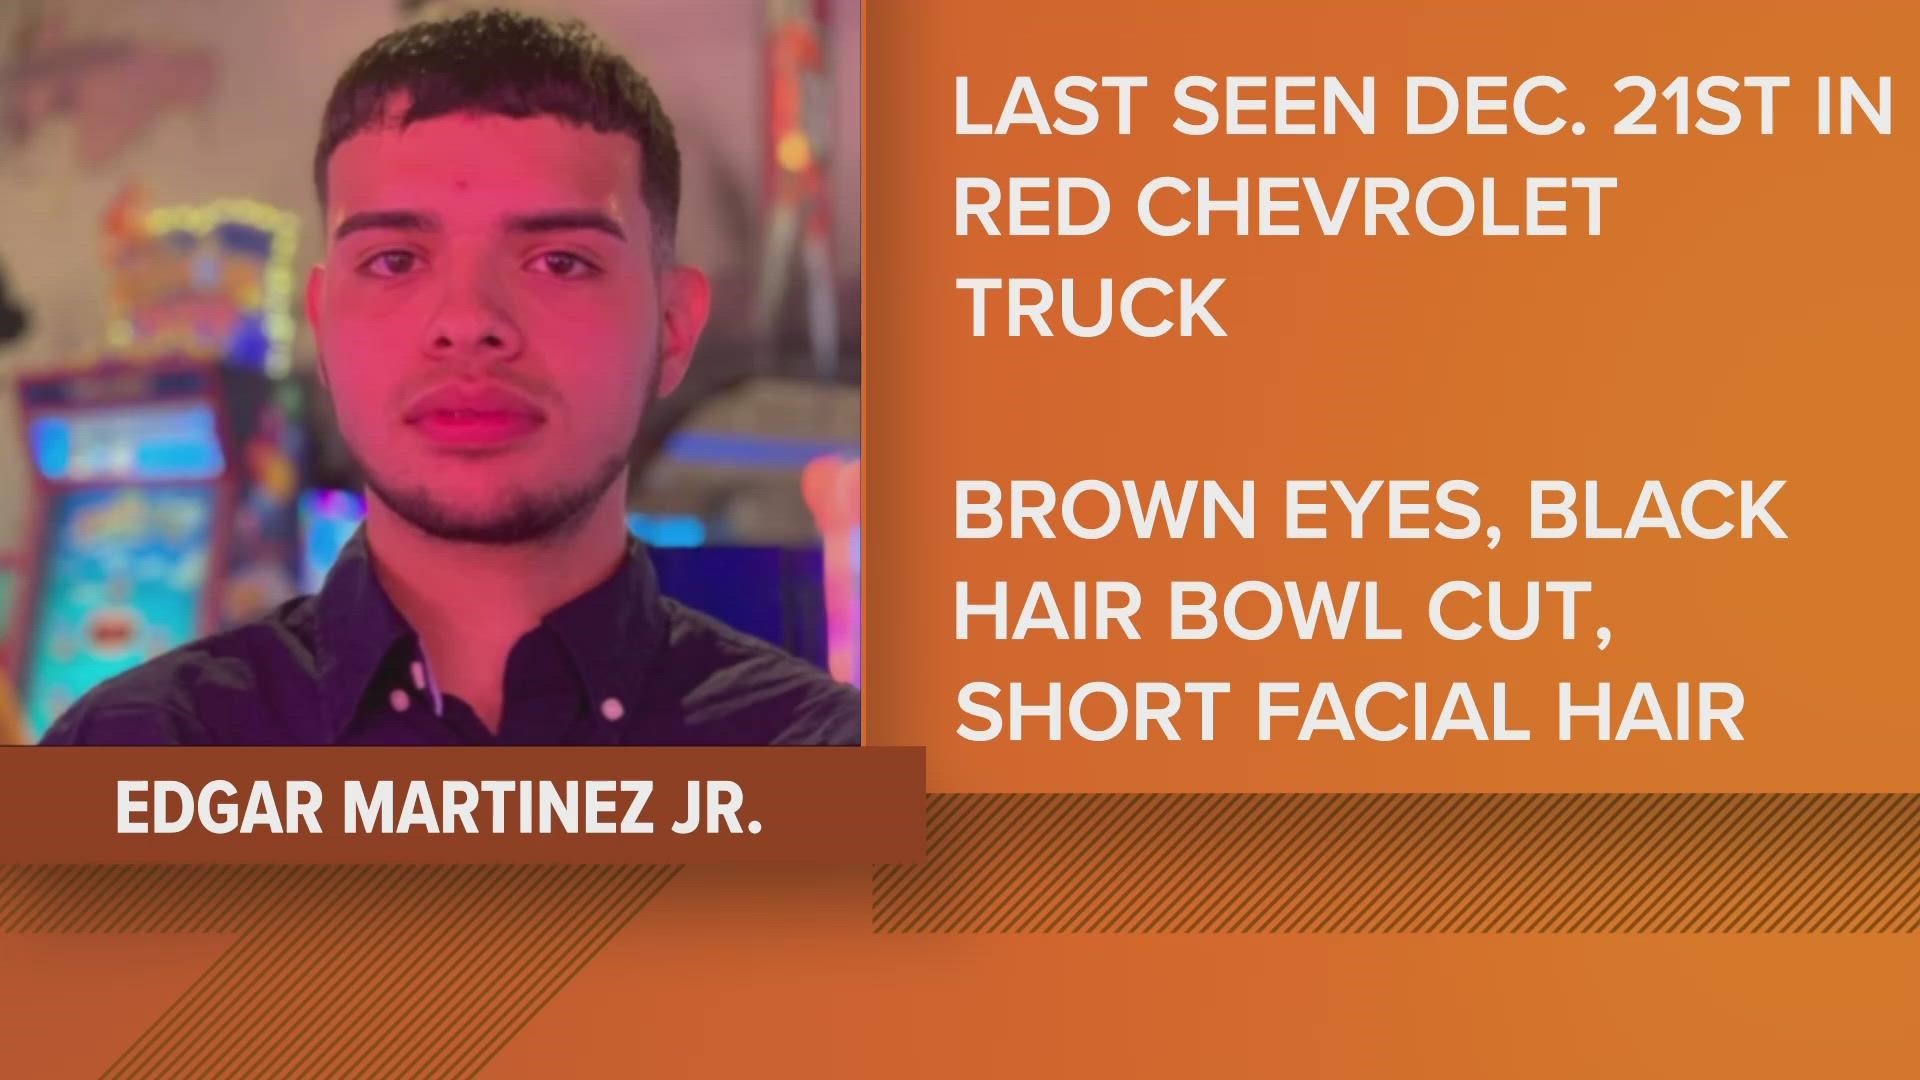 19-year-old Edgar Martinez Jr was last seen wearing an orange sweater, blue and white basketball shorts and white sandals on December 21.